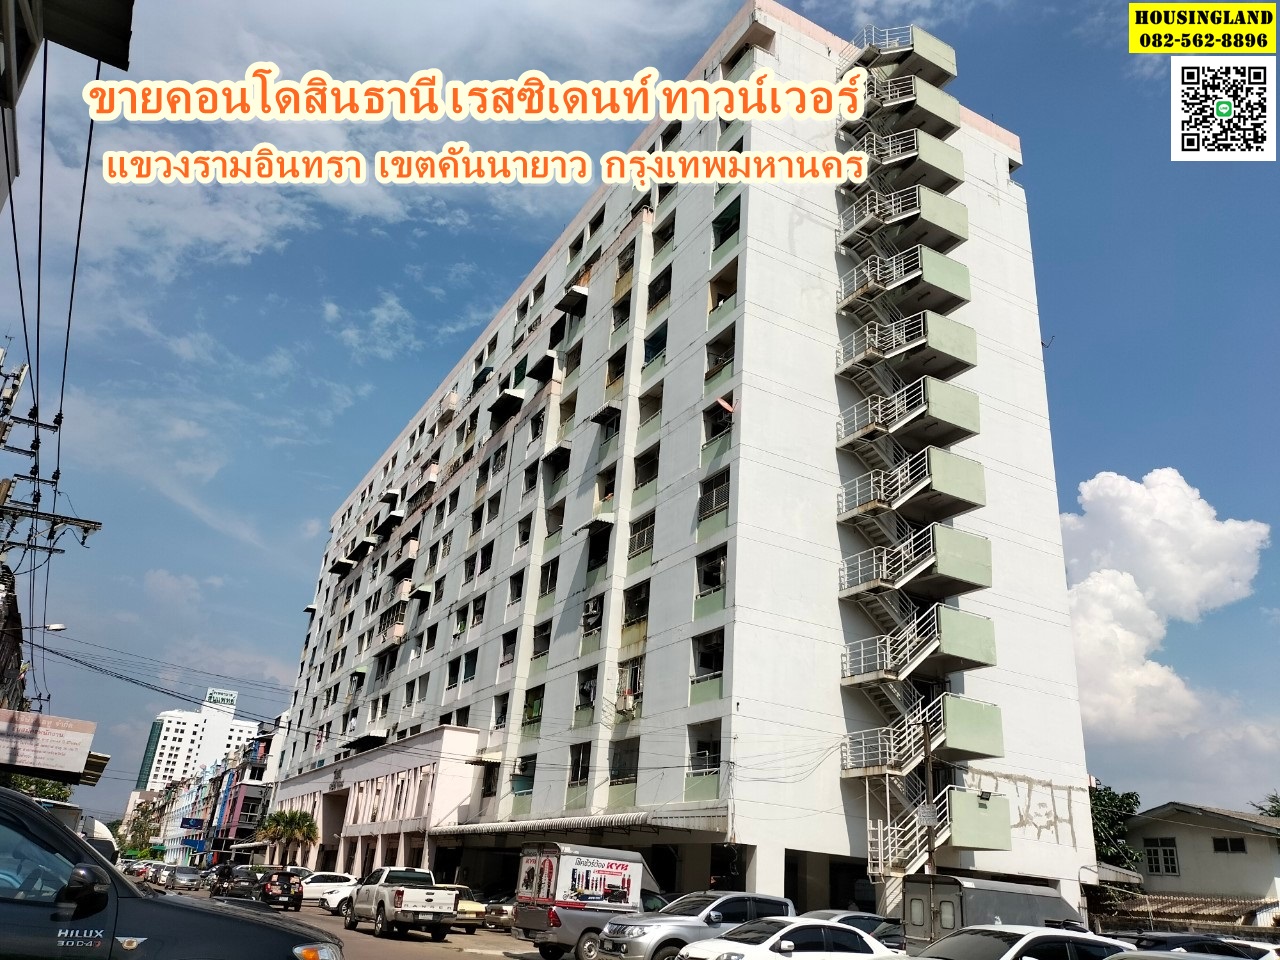 Condo for sale, Sinthanee Residence Tower, Ram Inthra Subdistrict, Khan Na Yao District, Bangkok.